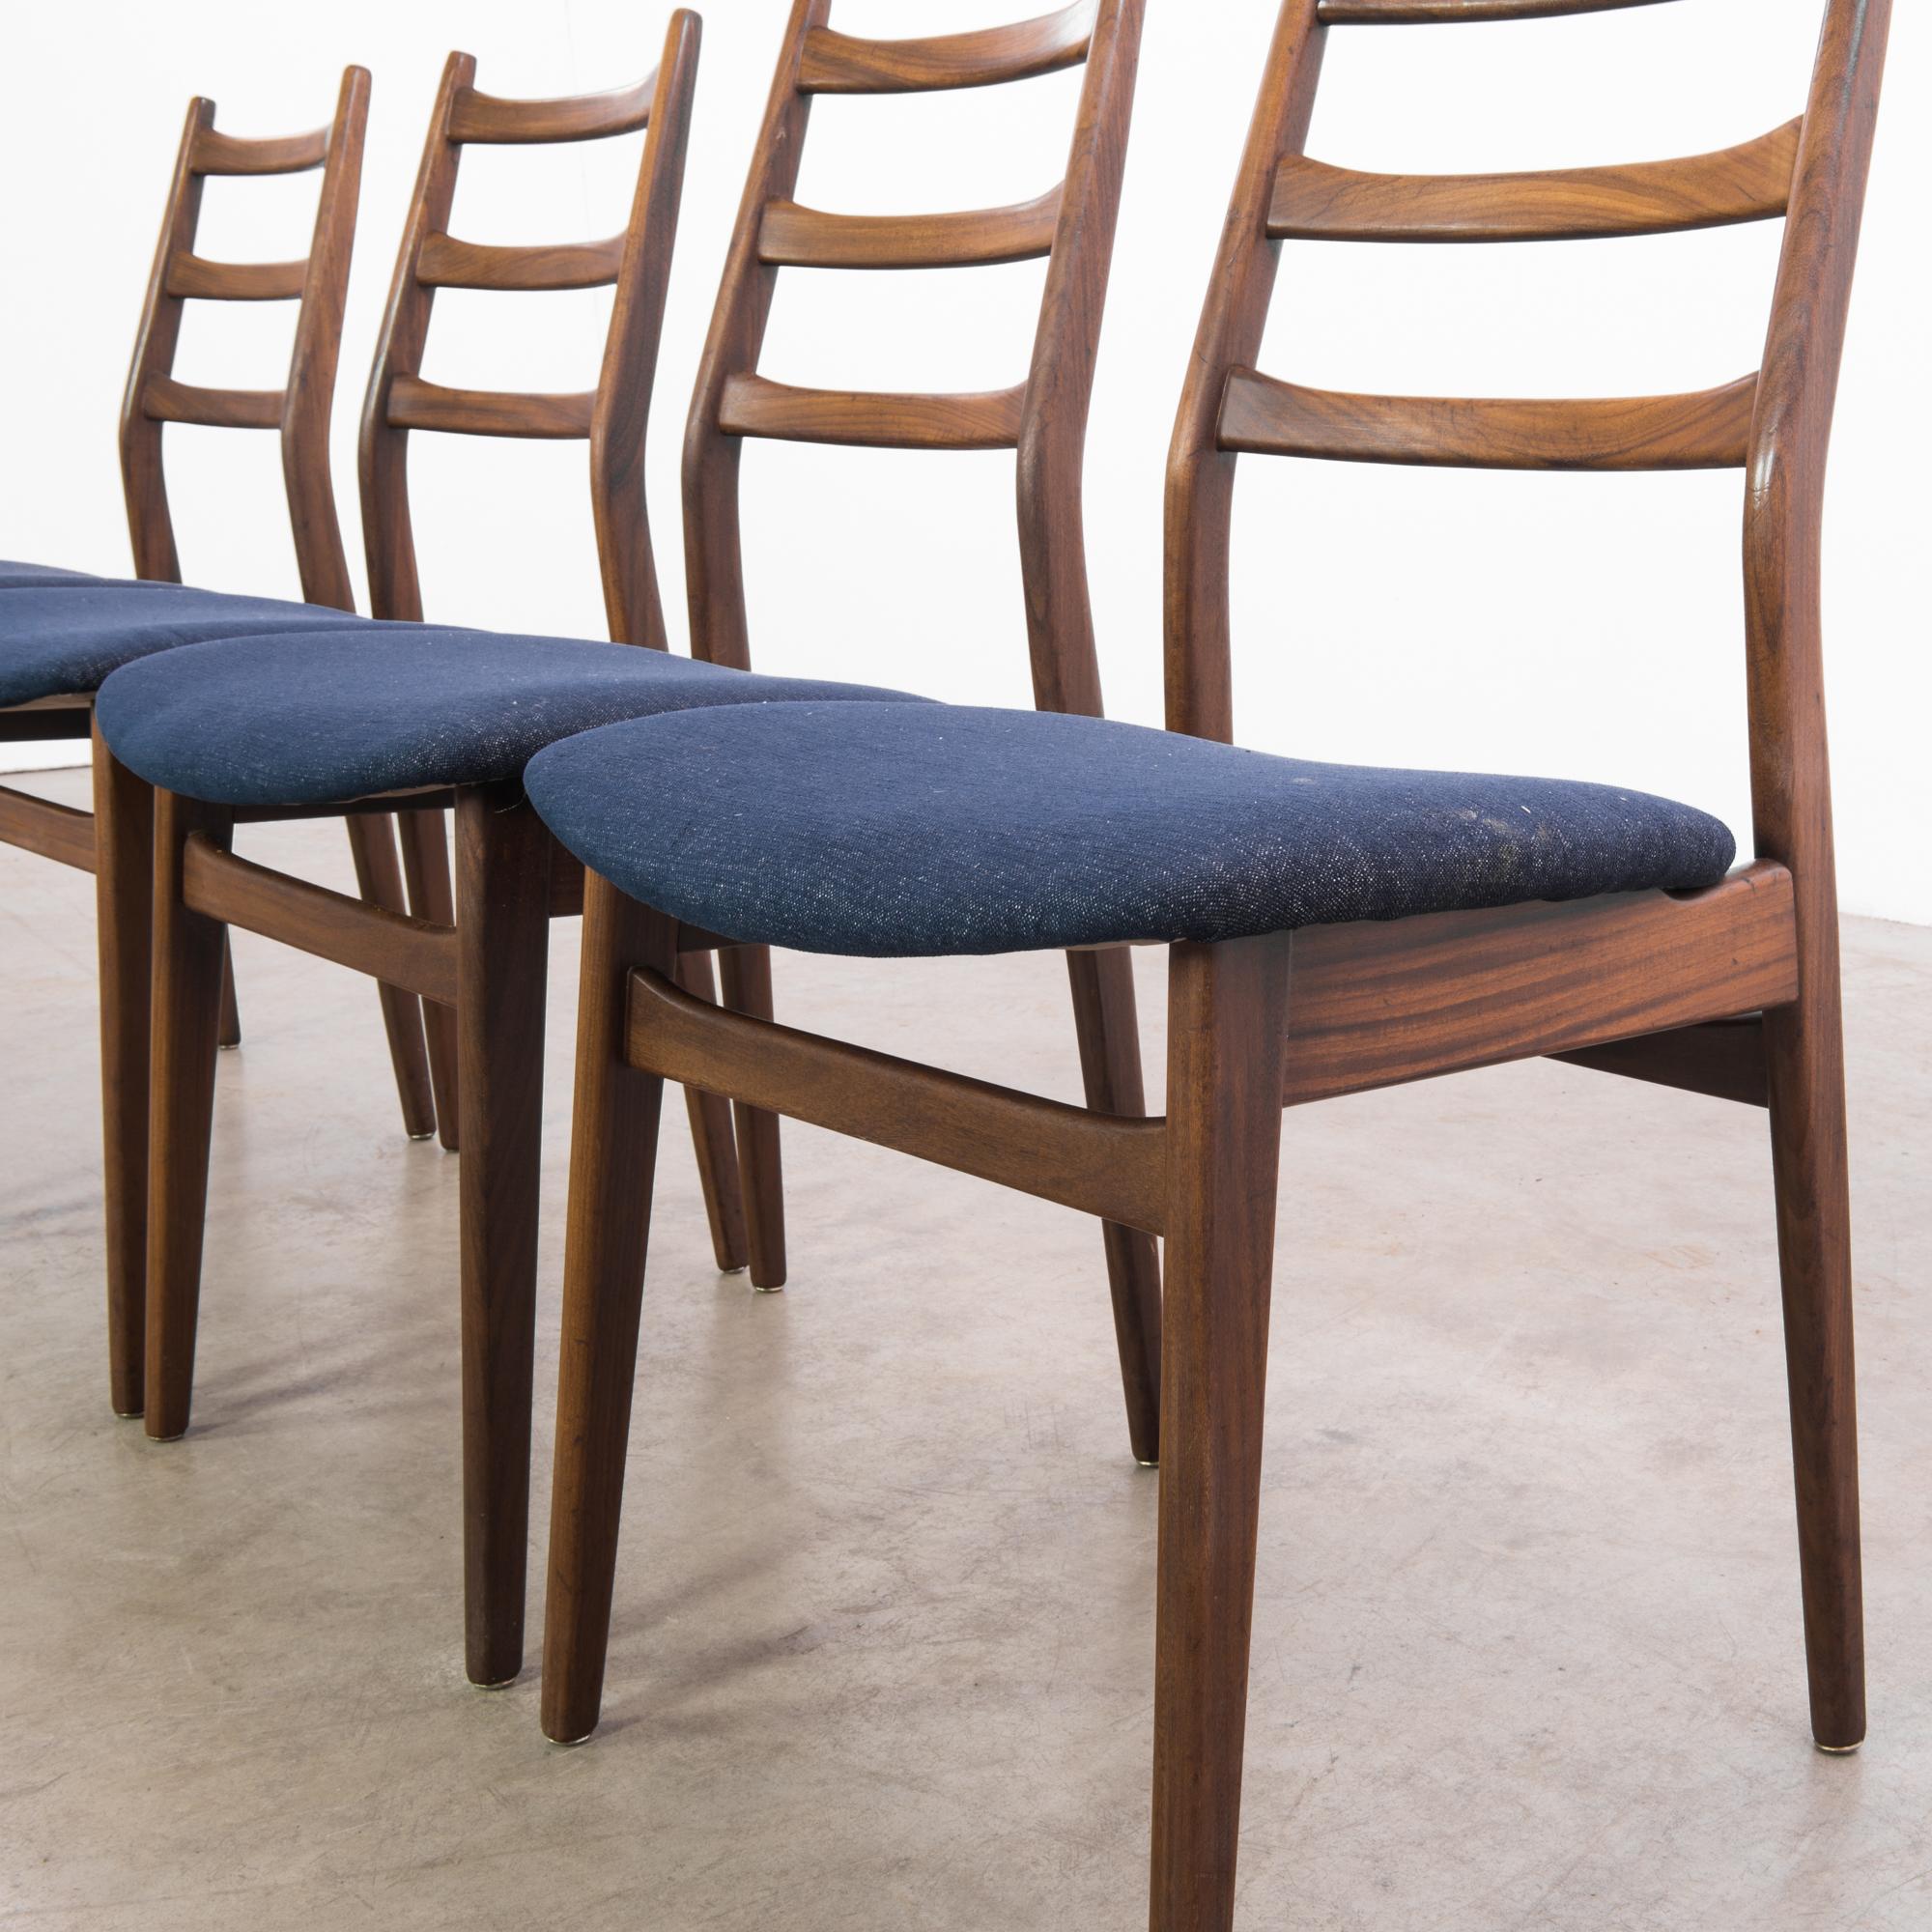 1960s Danish Wooden Chairs with Upholstered Seats, Set of 4 6